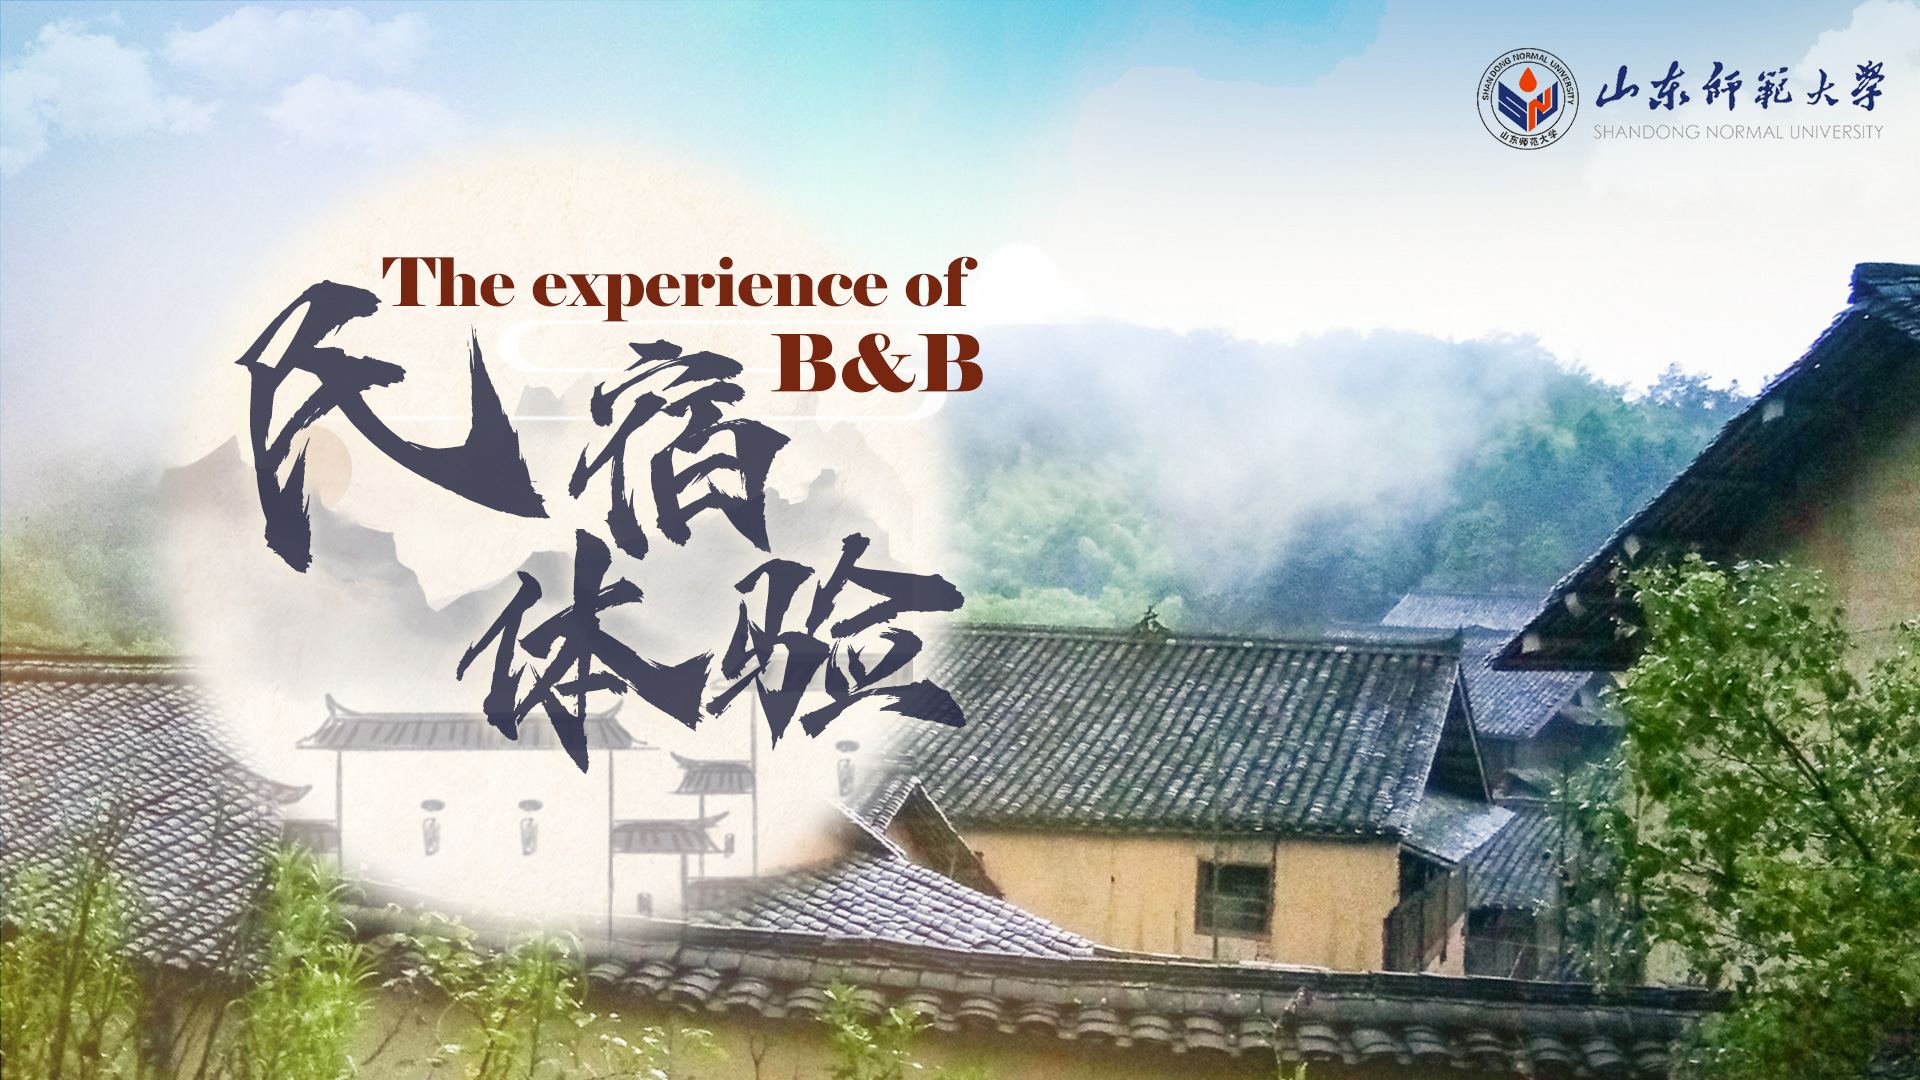 The experience of B&B